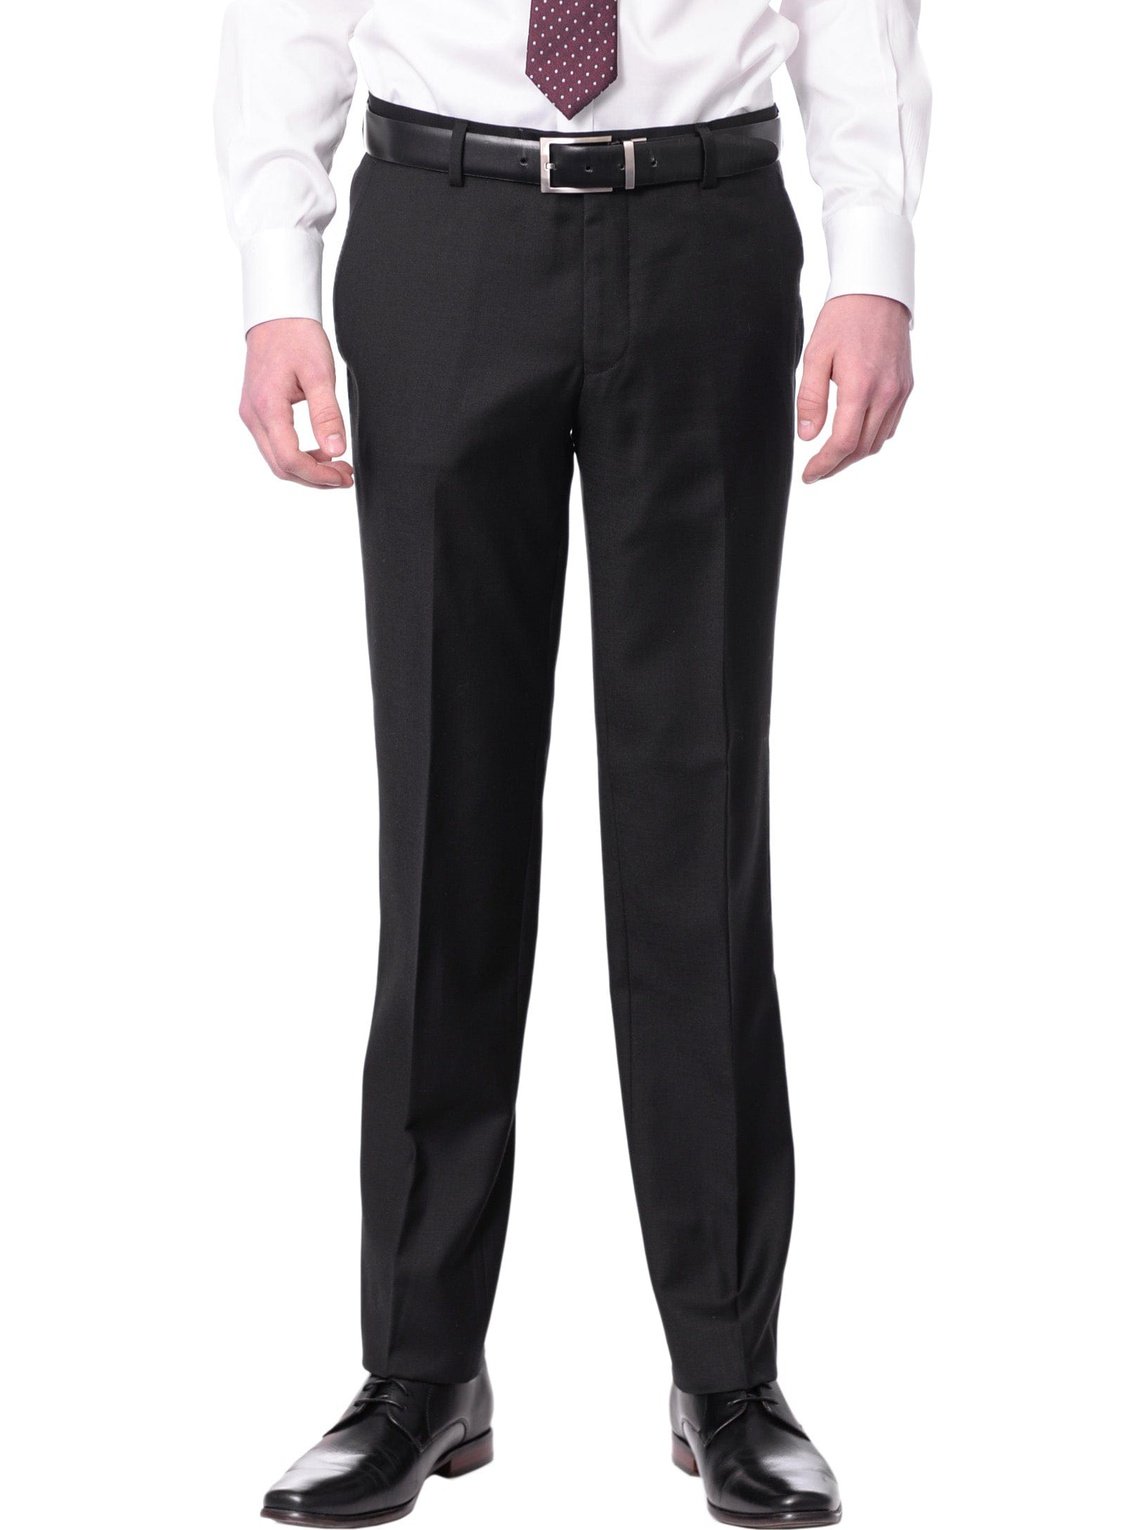 ESPRIT - Slim fit chequered suit trousers at our online shop